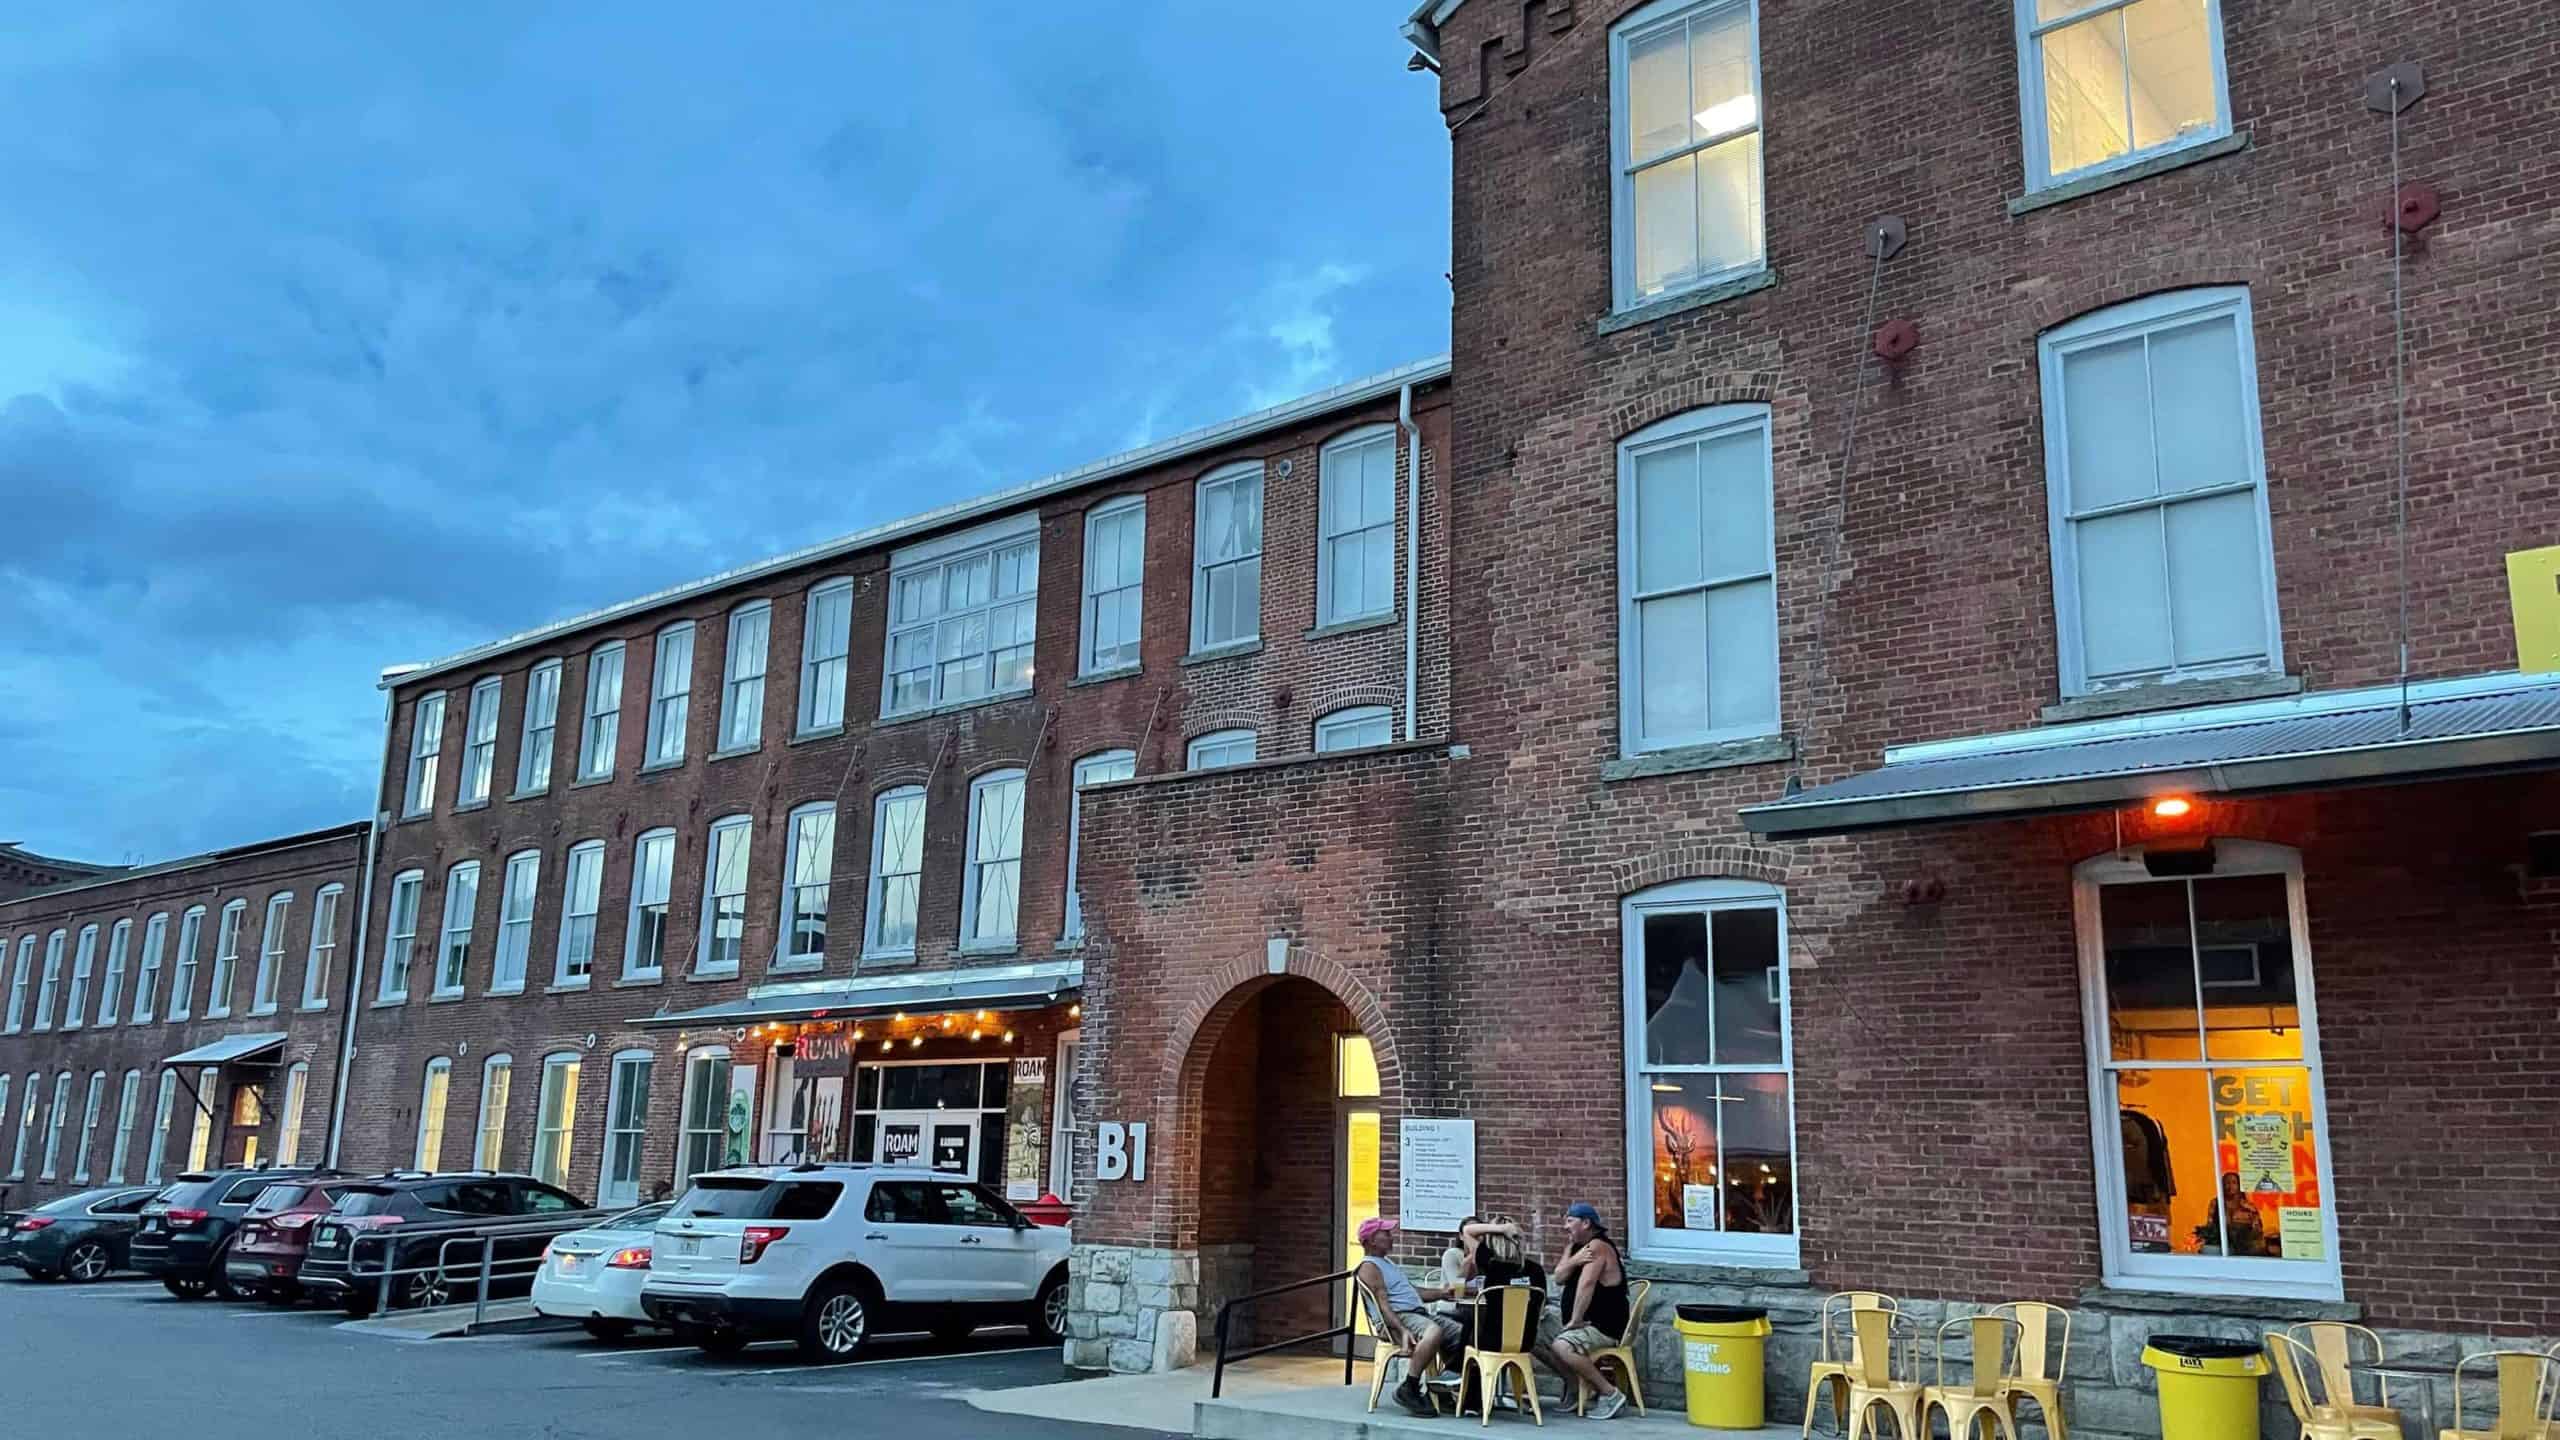 Bright Ideas offers local brews at night in the Mass MoCA courtyard.